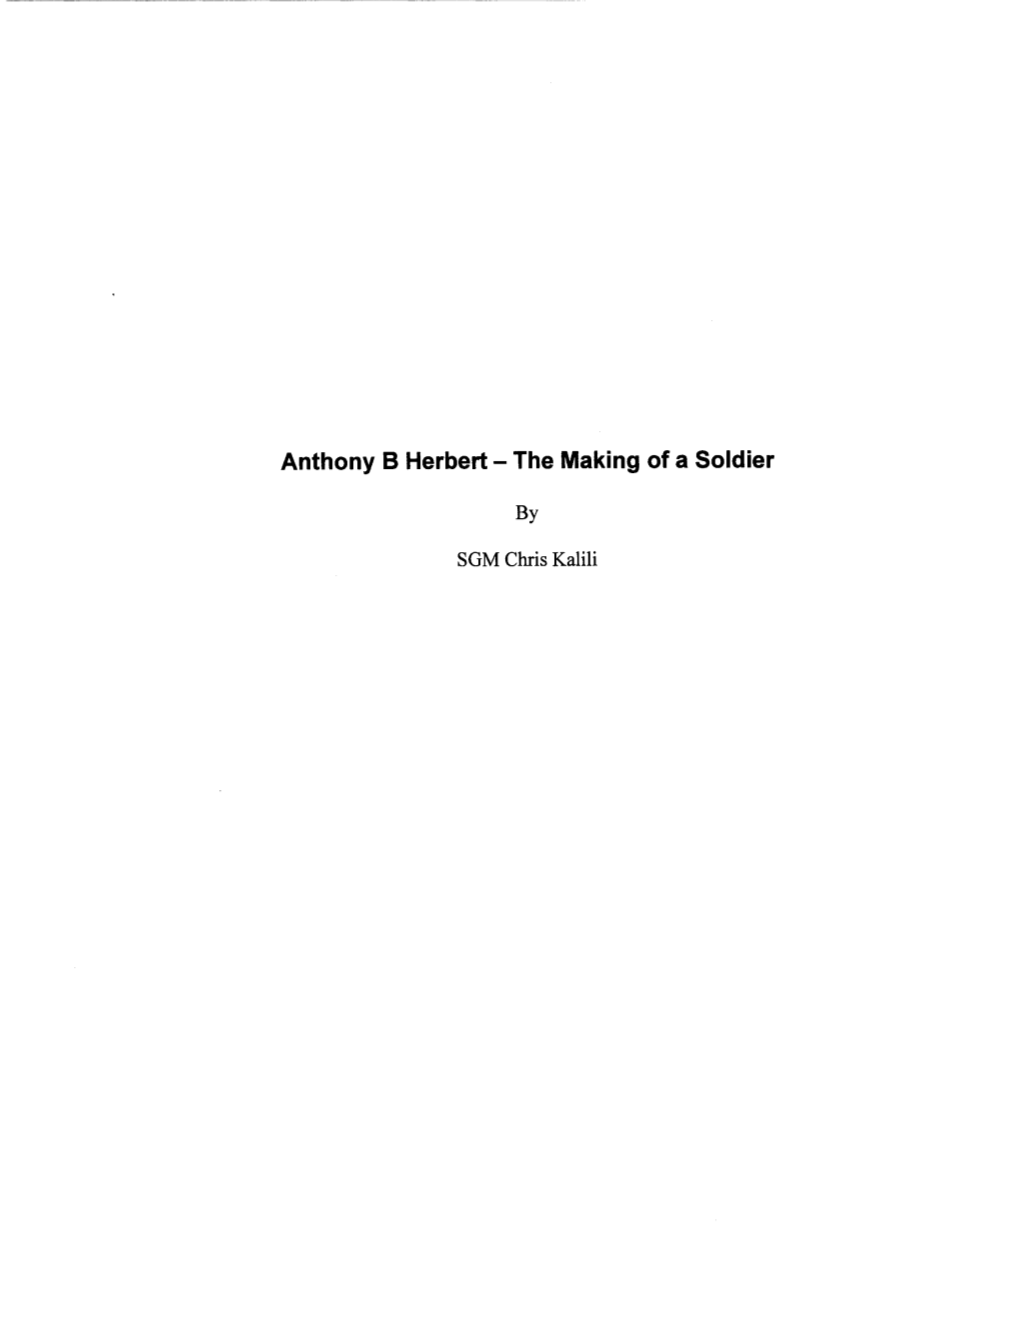 Anthony B Herbert - the Making of a Soldier